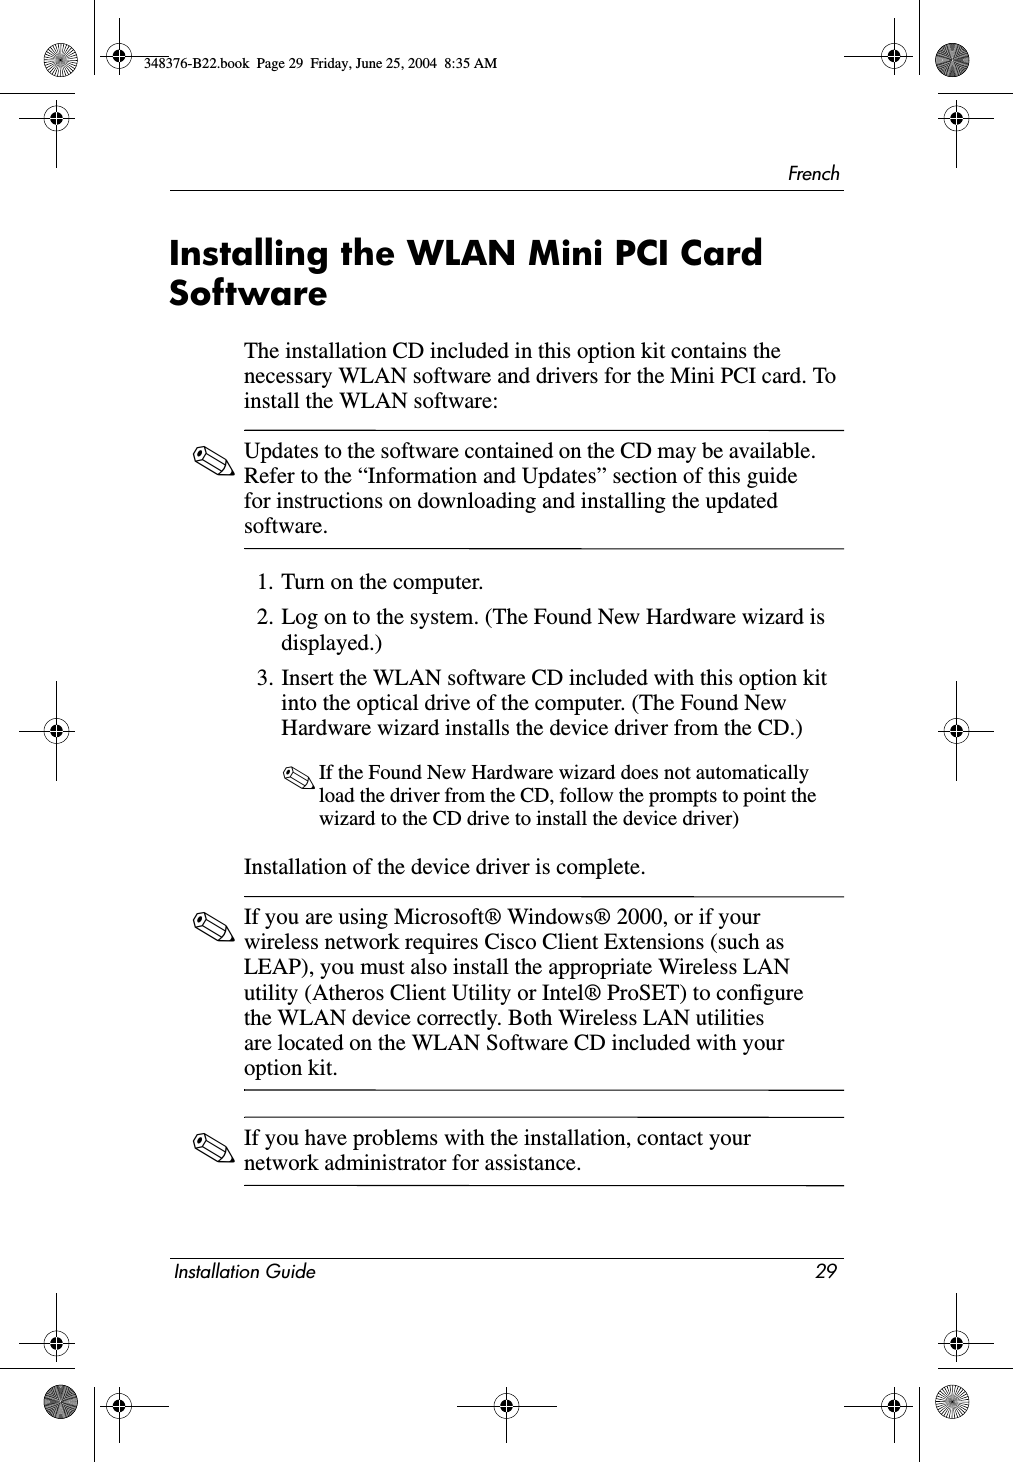 FrenchInstallation Guide 29Installing the WLAN Mini PCI Card SoftwareThe installation CD included in this option kit contains the necessary WLAN software and drivers for the Mini PCI card. To install the WLAN software: ✎Updates to the software contained on the CD may be available. Refer to the “Information and Updates” section of this guide for instructions on downloading and installing the updated software.1. Turn on the computer.2. Log on to the system. (The Found New Hardware wizard is displayed.)3. Insert the WLAN software CD included with this option kit into the optical drive of the computer. (The Found New Hardware wizard installs the device driver from the CD.)✎If the Found New Hardware wizard does not automatically load the driver from the CD, follow the prompts to point the wizard to the CD drive to install the device driver)Installation of the device driver is complete.✎If you are using Microsoft® Windows® 2000, or if your wireless network requires Cisco Client Extensions (such as LEAP), you must also install the appropriate Wireless LAN utility (Atheros Client Utility or Intel® ProSET) to configure the WLAN device correctly. Both Wireless LAN utilities are located on the WLAN Software CD included with your option kit. ✎If you have problems with the installation, contact your network administrator for assistance.348376-B22.book  Page 29  Friday, June 25, 2004  8:35 AM